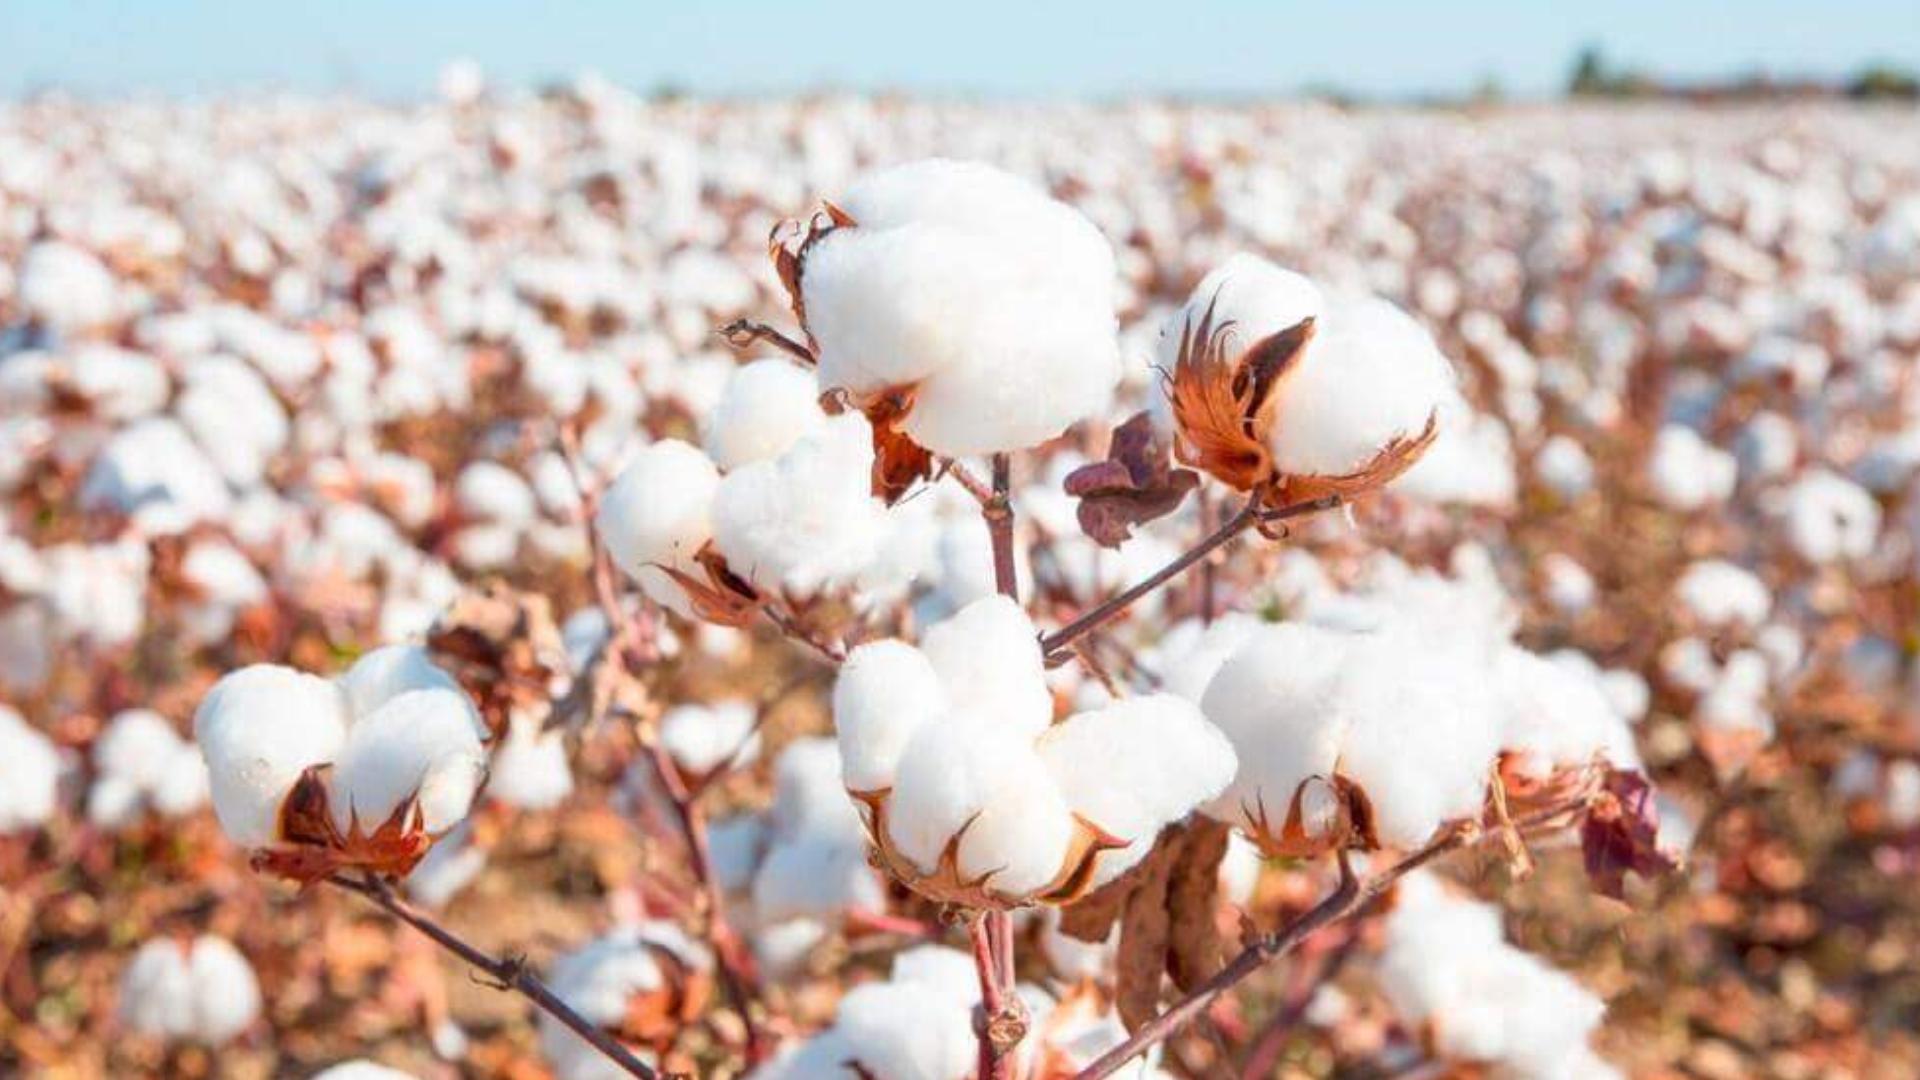 No profit with environmental disaster: how the cotton industry in Central Asia is feeling